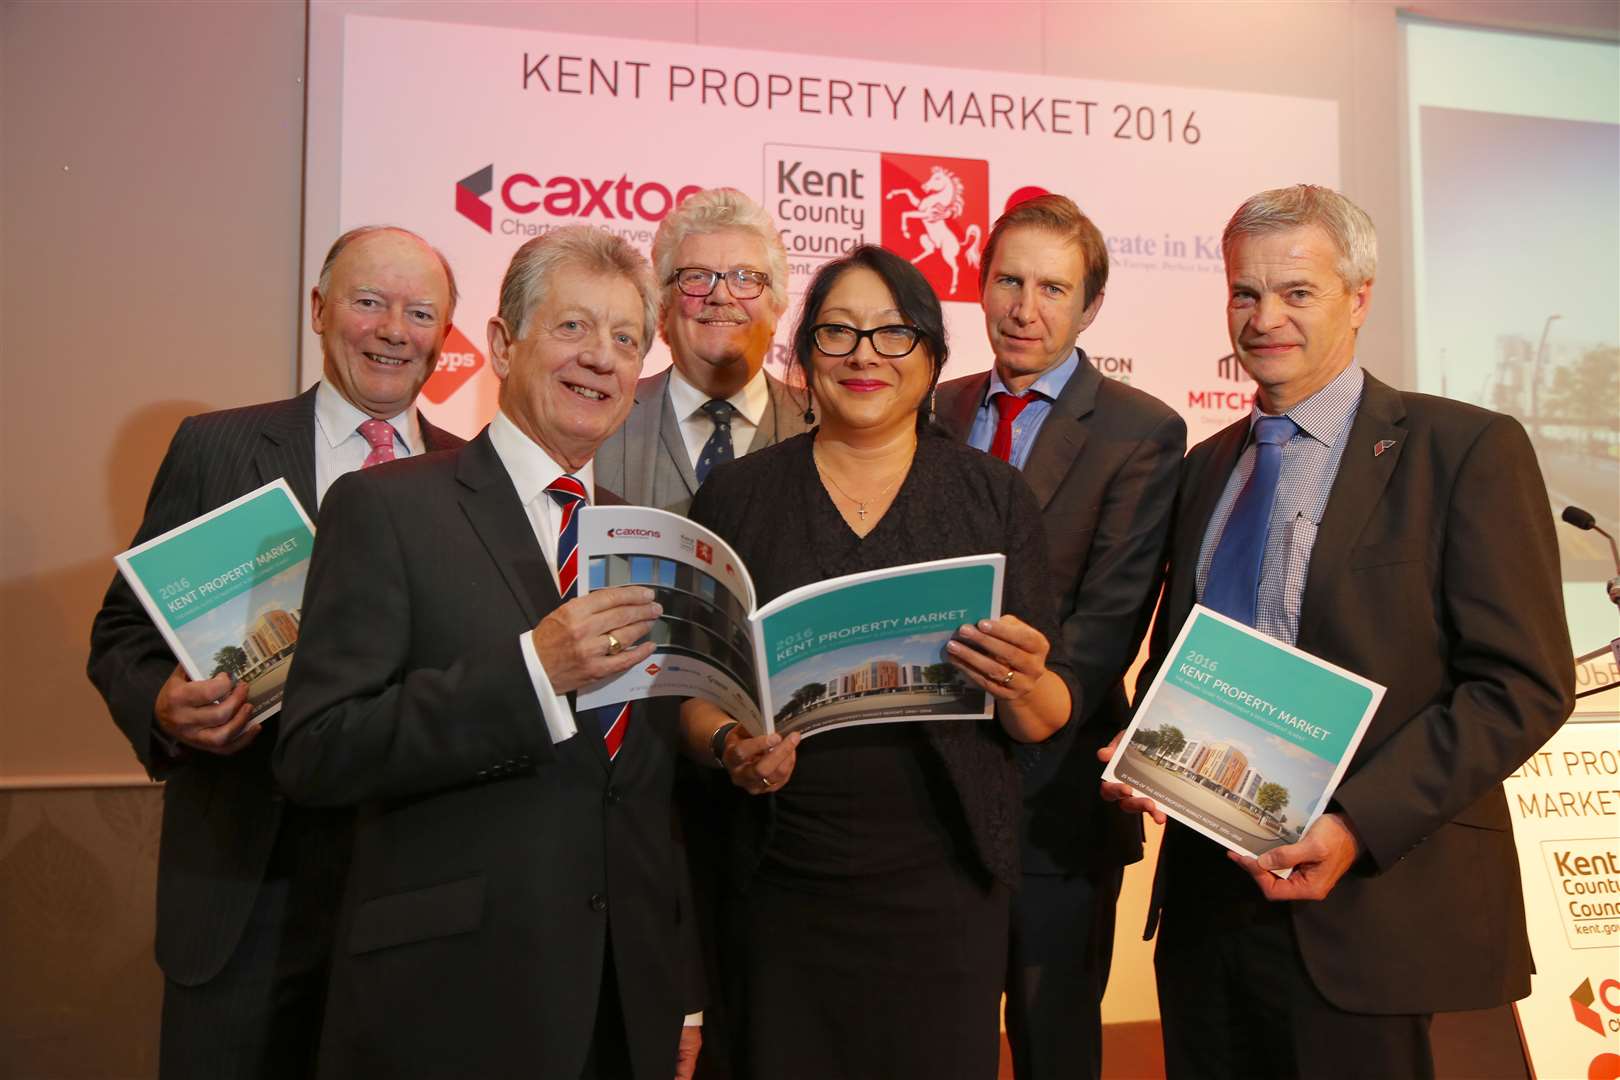 Launching the Kent Property Market Report, from left, Locate in Kent chairman David Fitzsimmons, Caxtons chairman Ron Roser, Kent County Council's Cllr Mark Dance, guest speaker Liz Hamson of Property Week and Mark Coxon and David Gurton of Caxtons